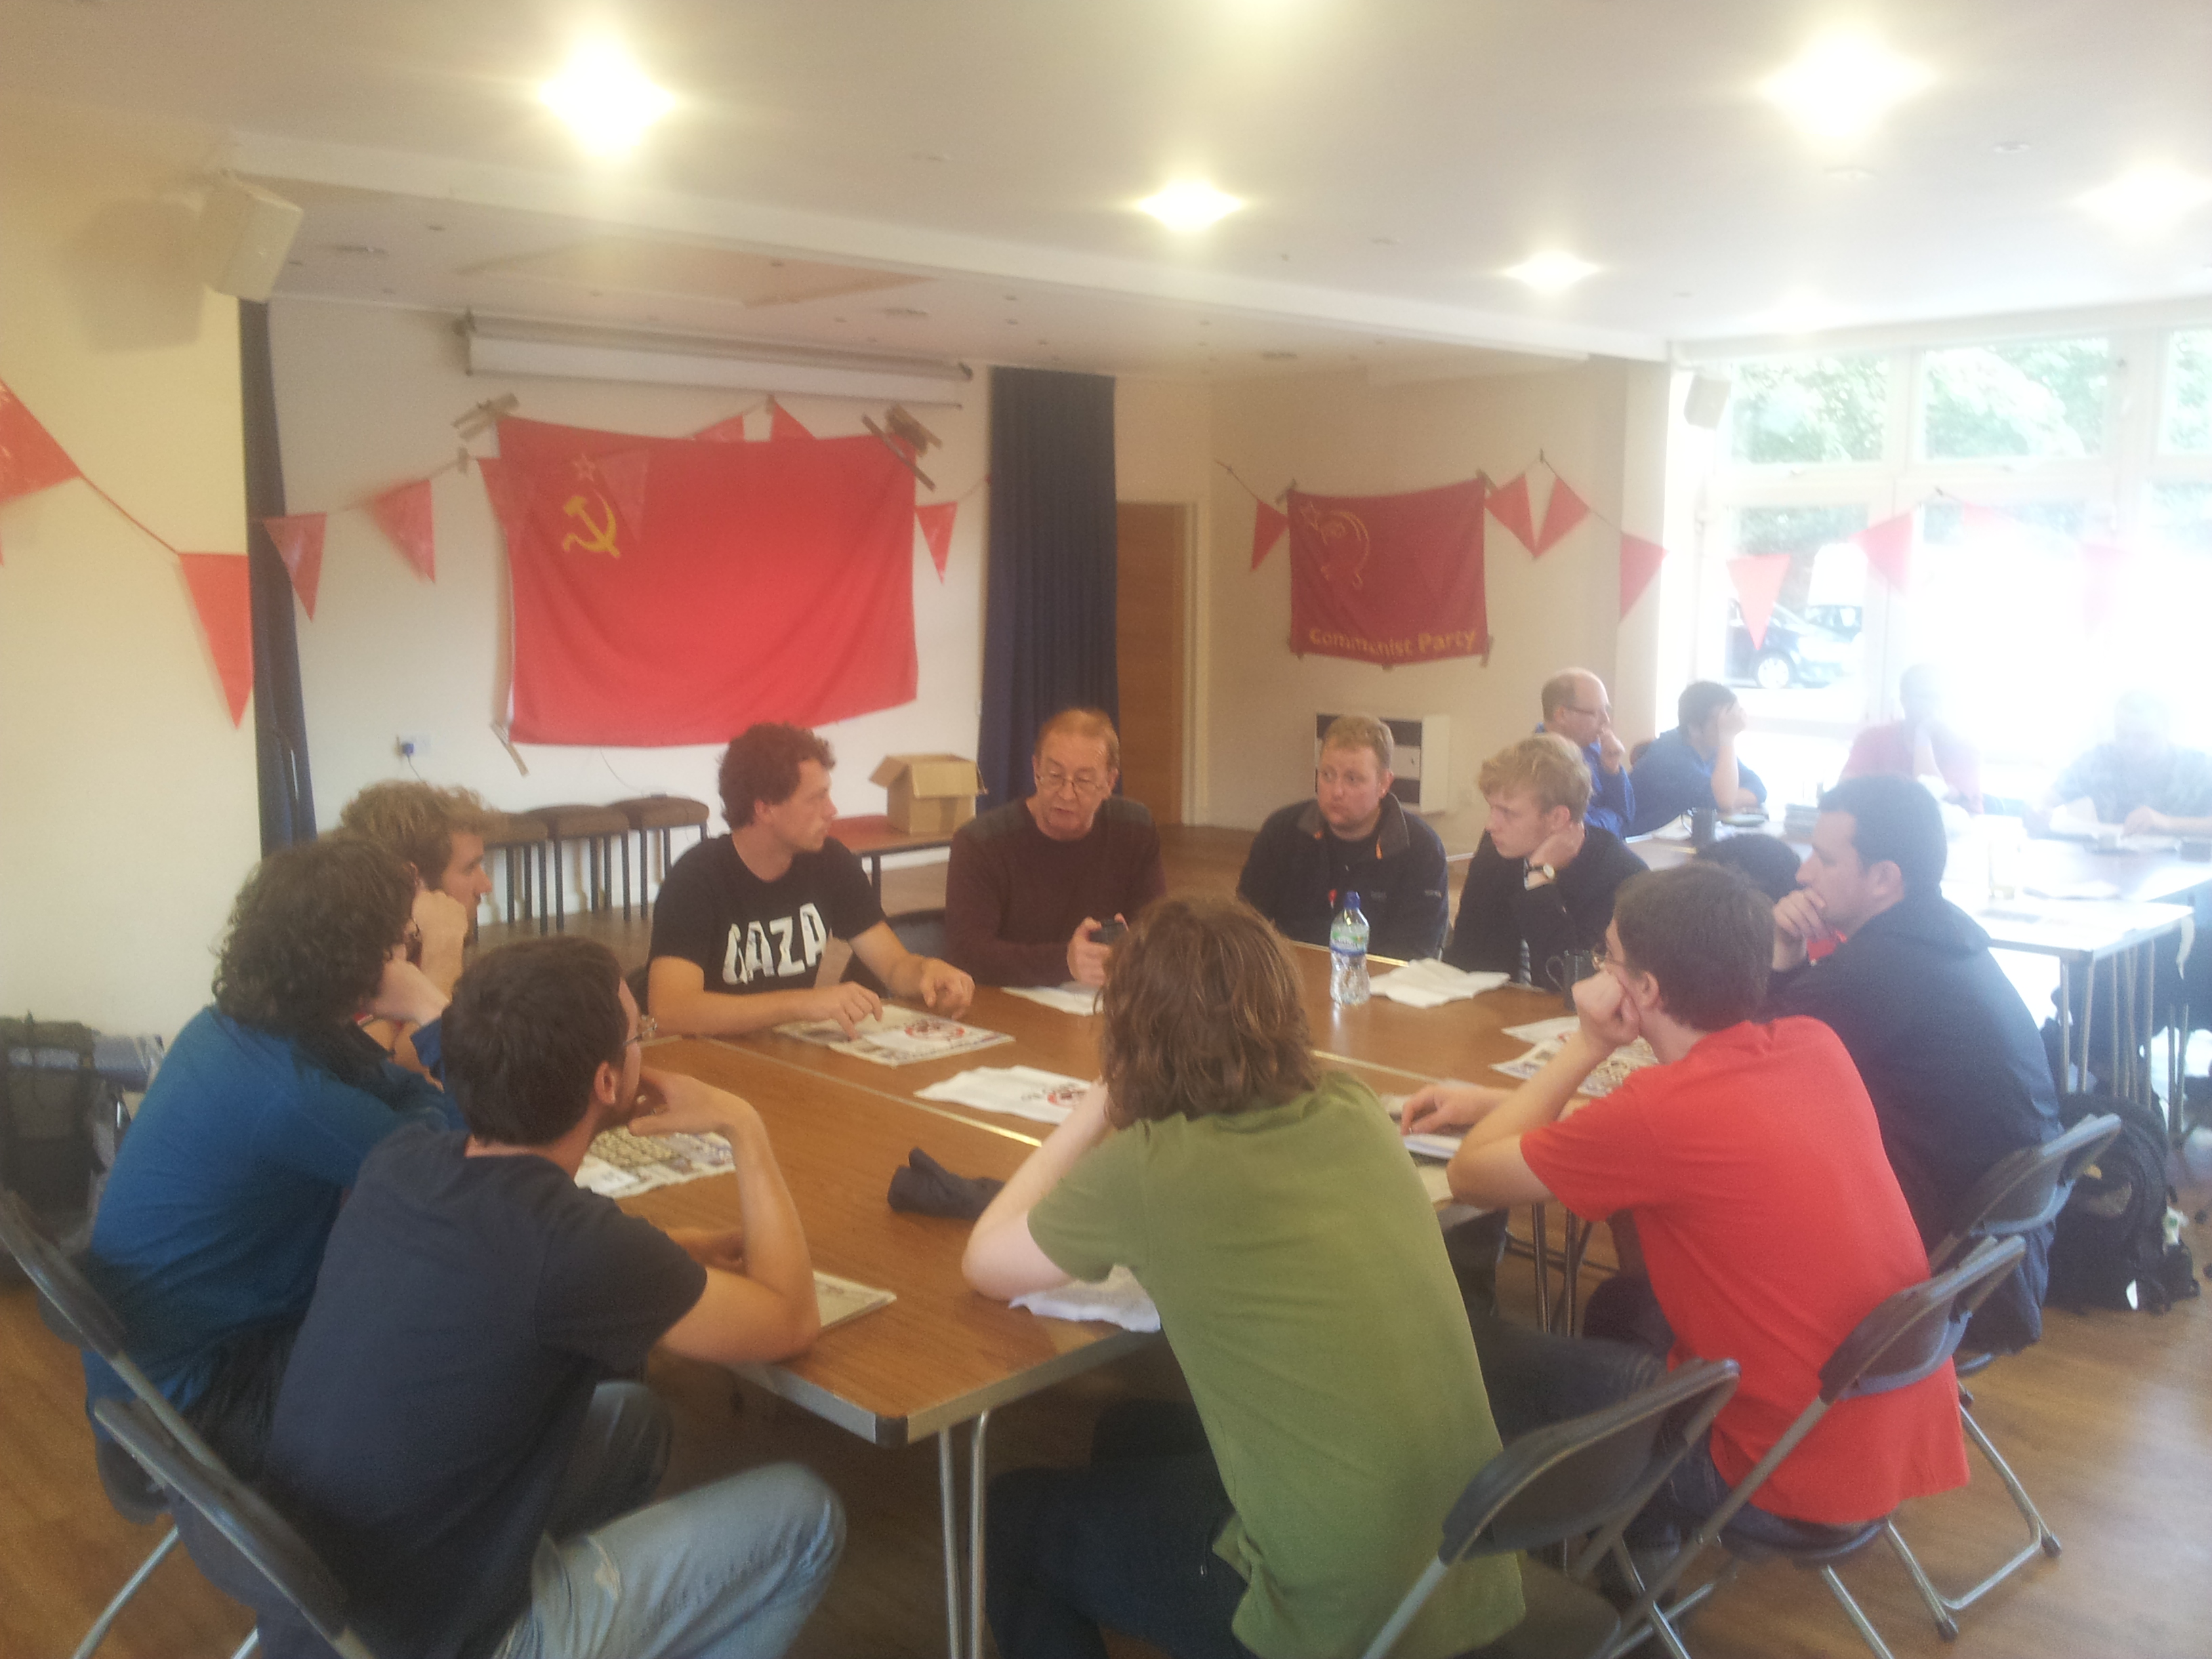 Sunday morning Education Classes with a visit from Communist Party of Britain General Secretary Robert Griffths who spoke on the CP and Elections; and the CP and the National Question